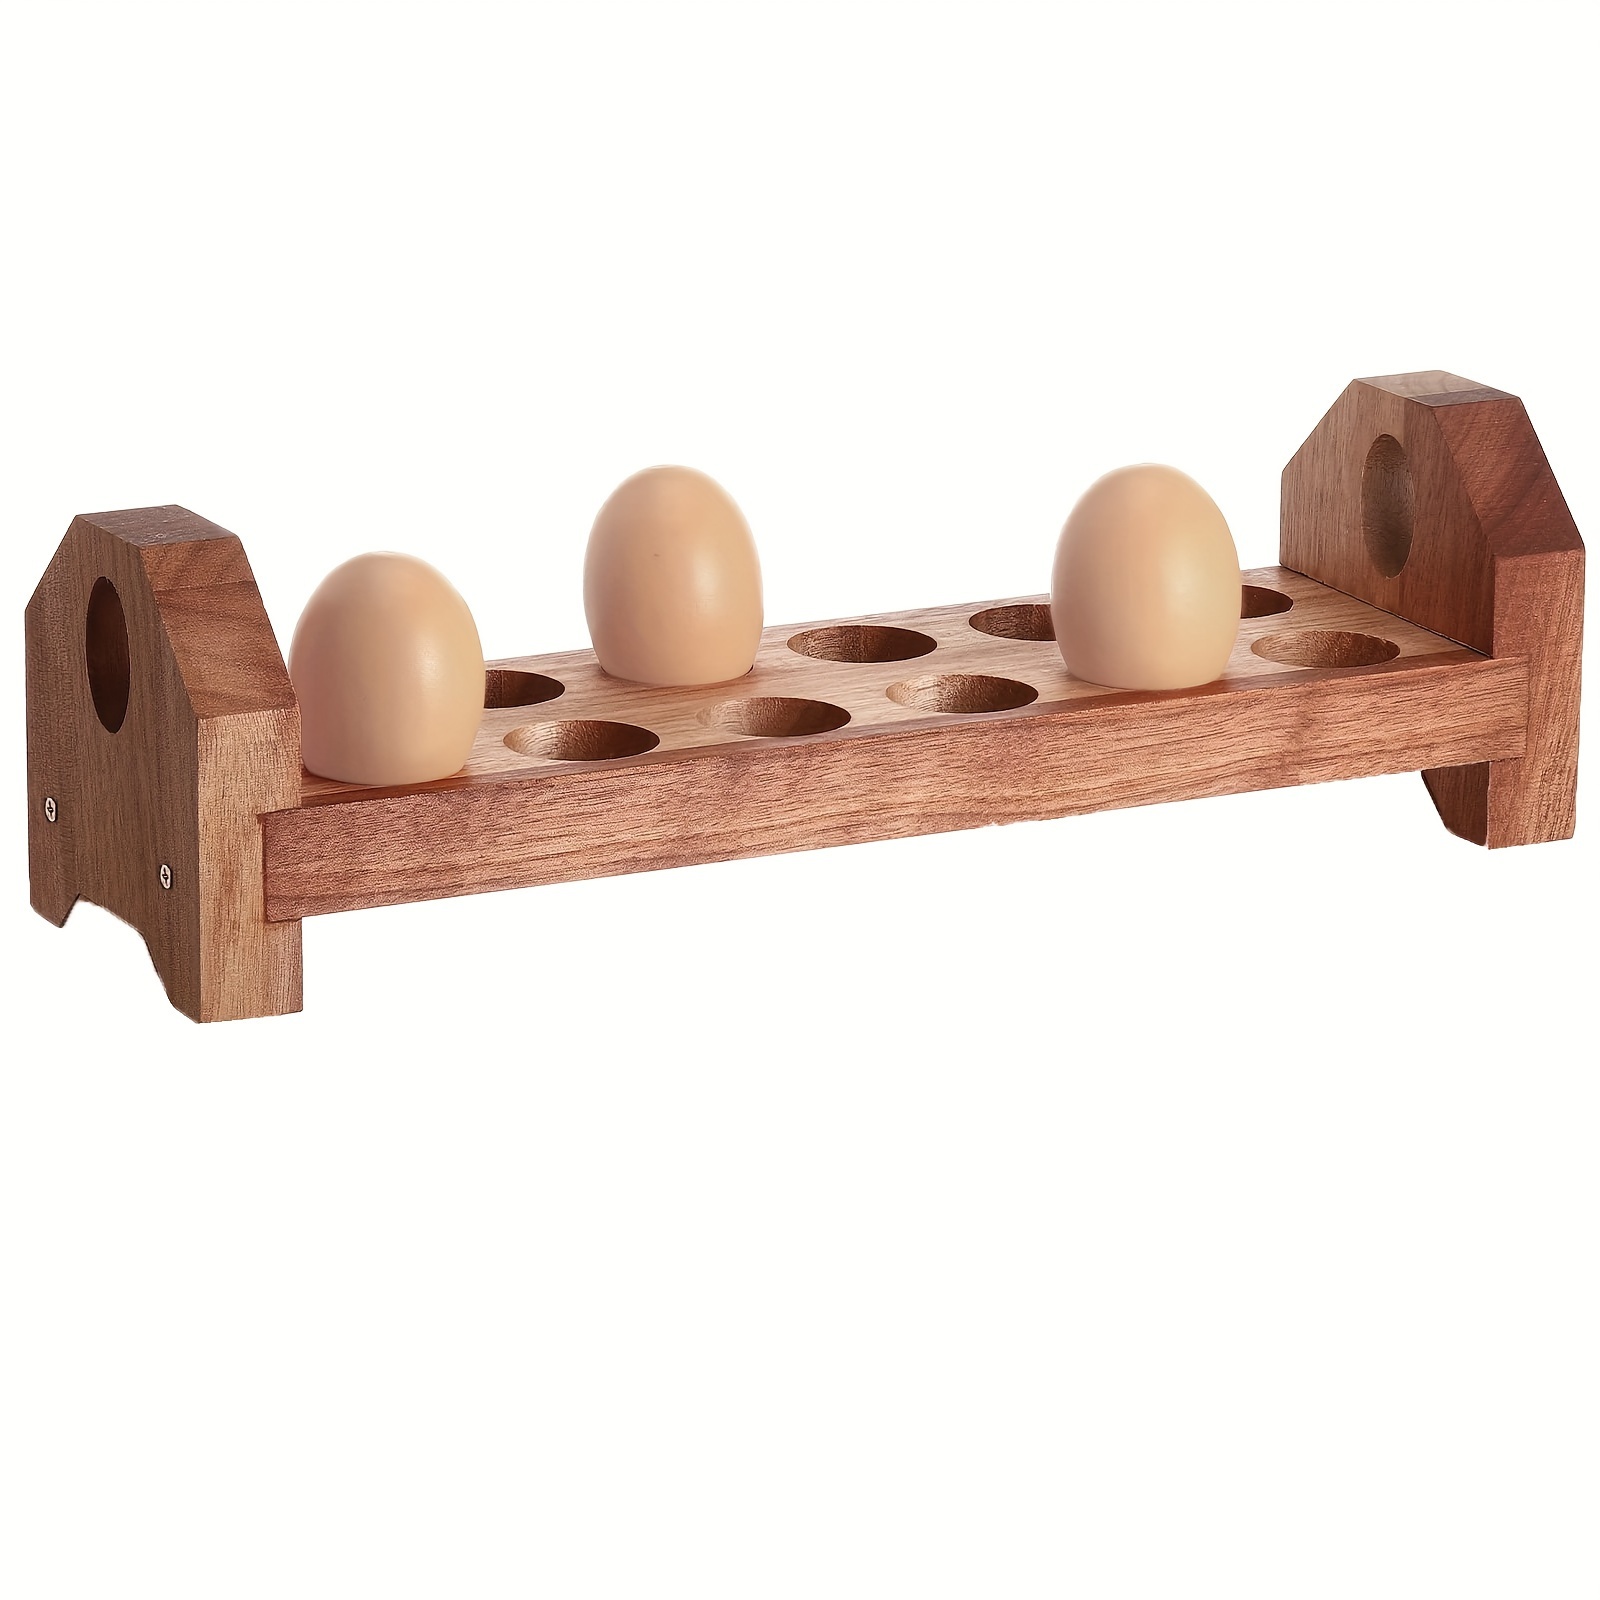 

Rustic Wooden Egg Holder For Fresh Eggs - Stackable Egg Storage Tray For Countertop - Wood Egg Basket Organizer With 2/3-tier Design For Kitchen Display - Farmhouse Style Egg Container Rack